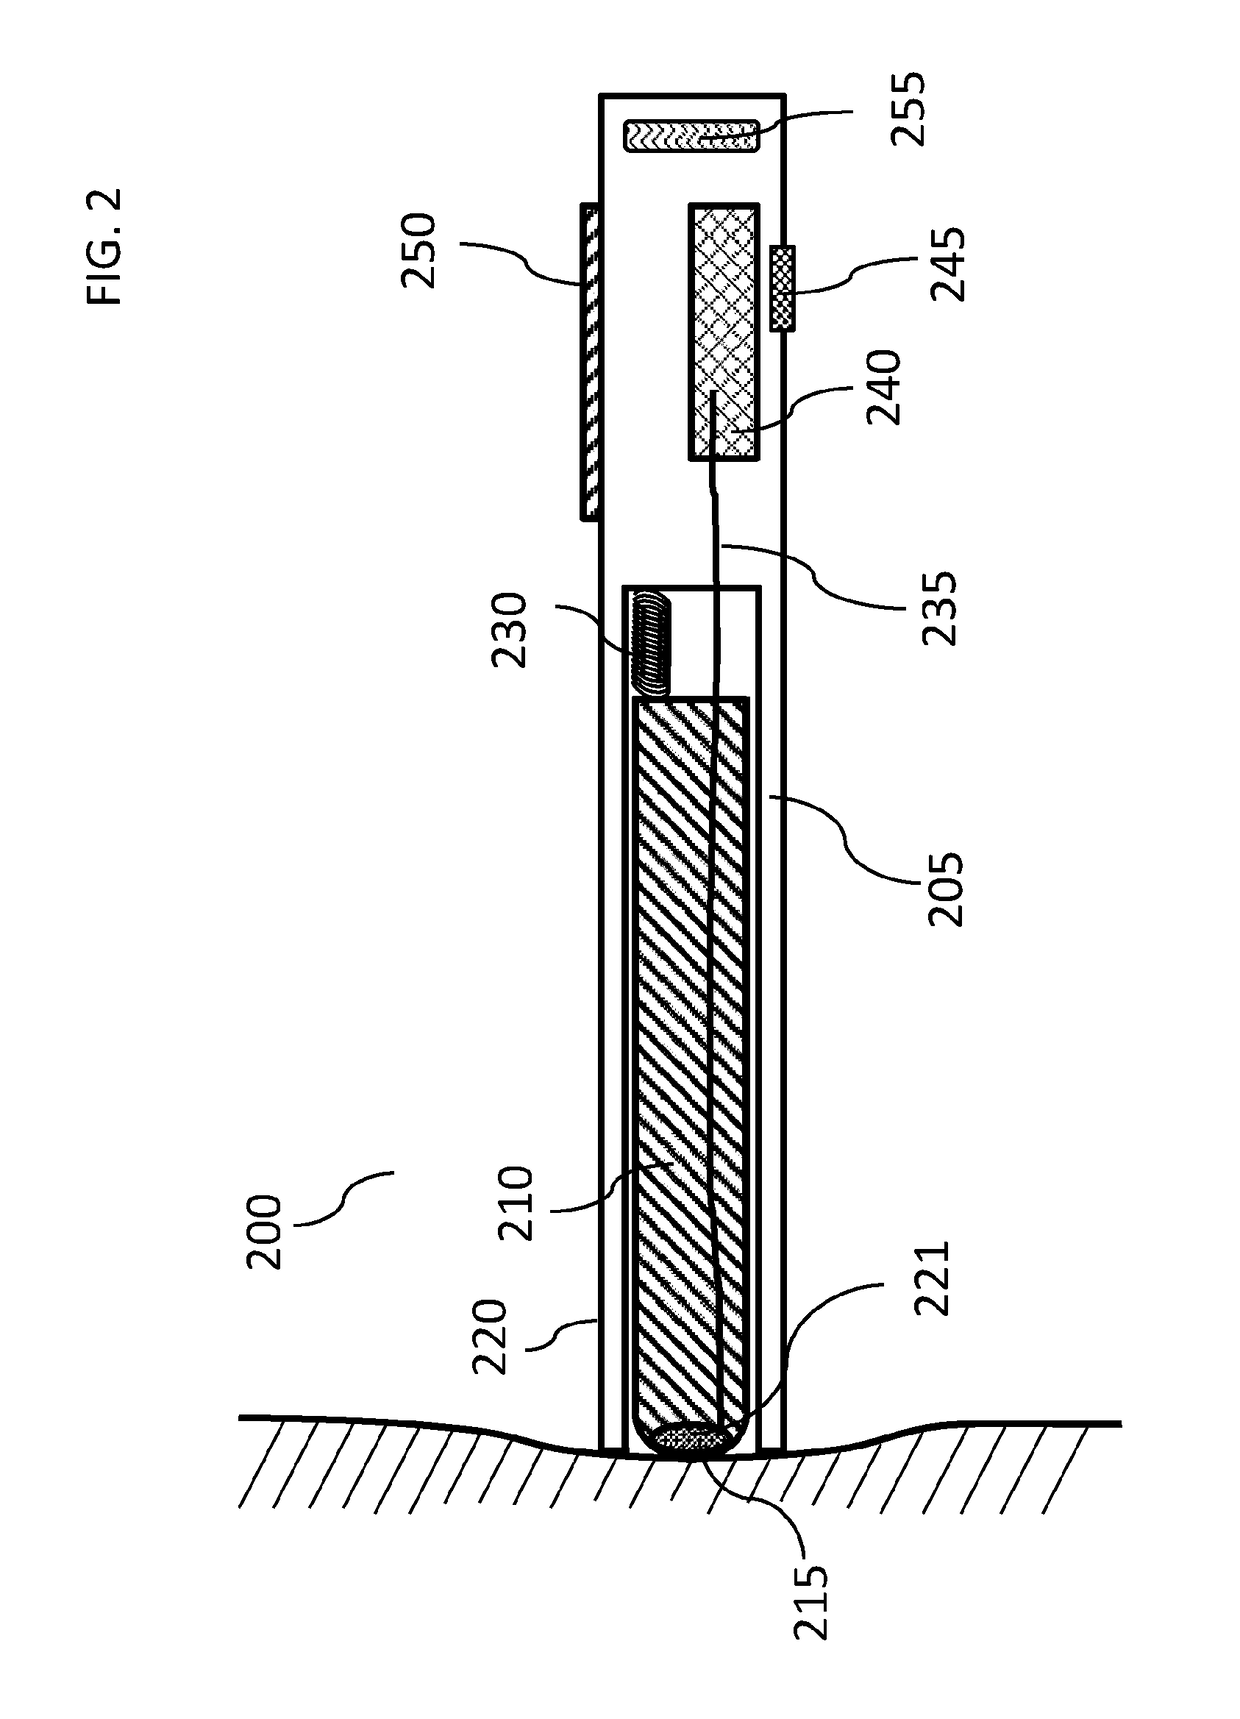 Cutaneous blood flow monitoring device